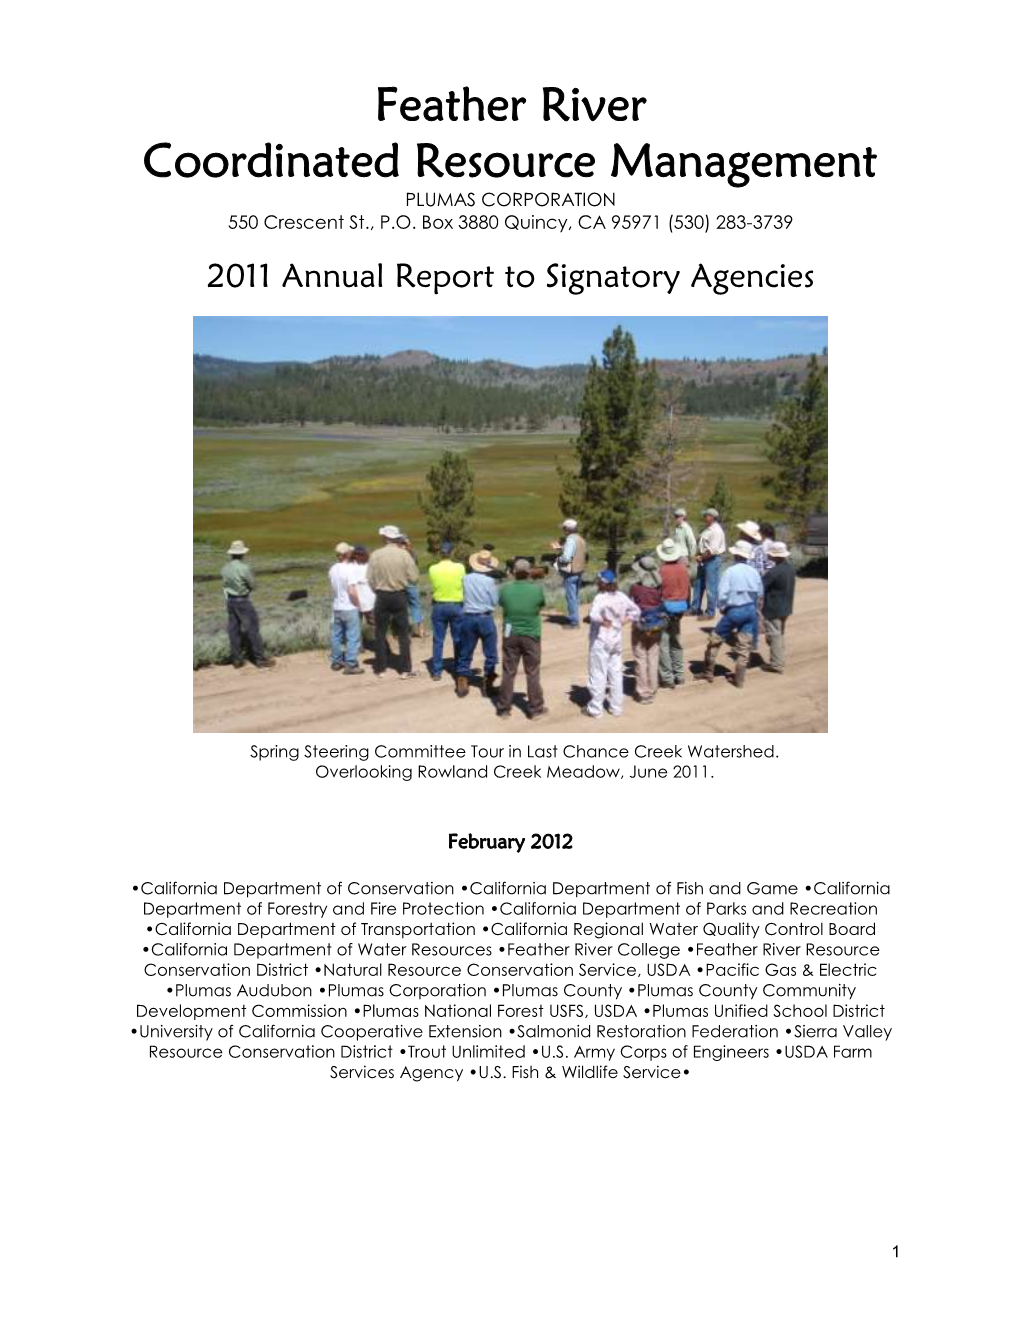 Feather River Coordinated Resource Management PLUMAS CORPORATION 550 Crescent St., P.O